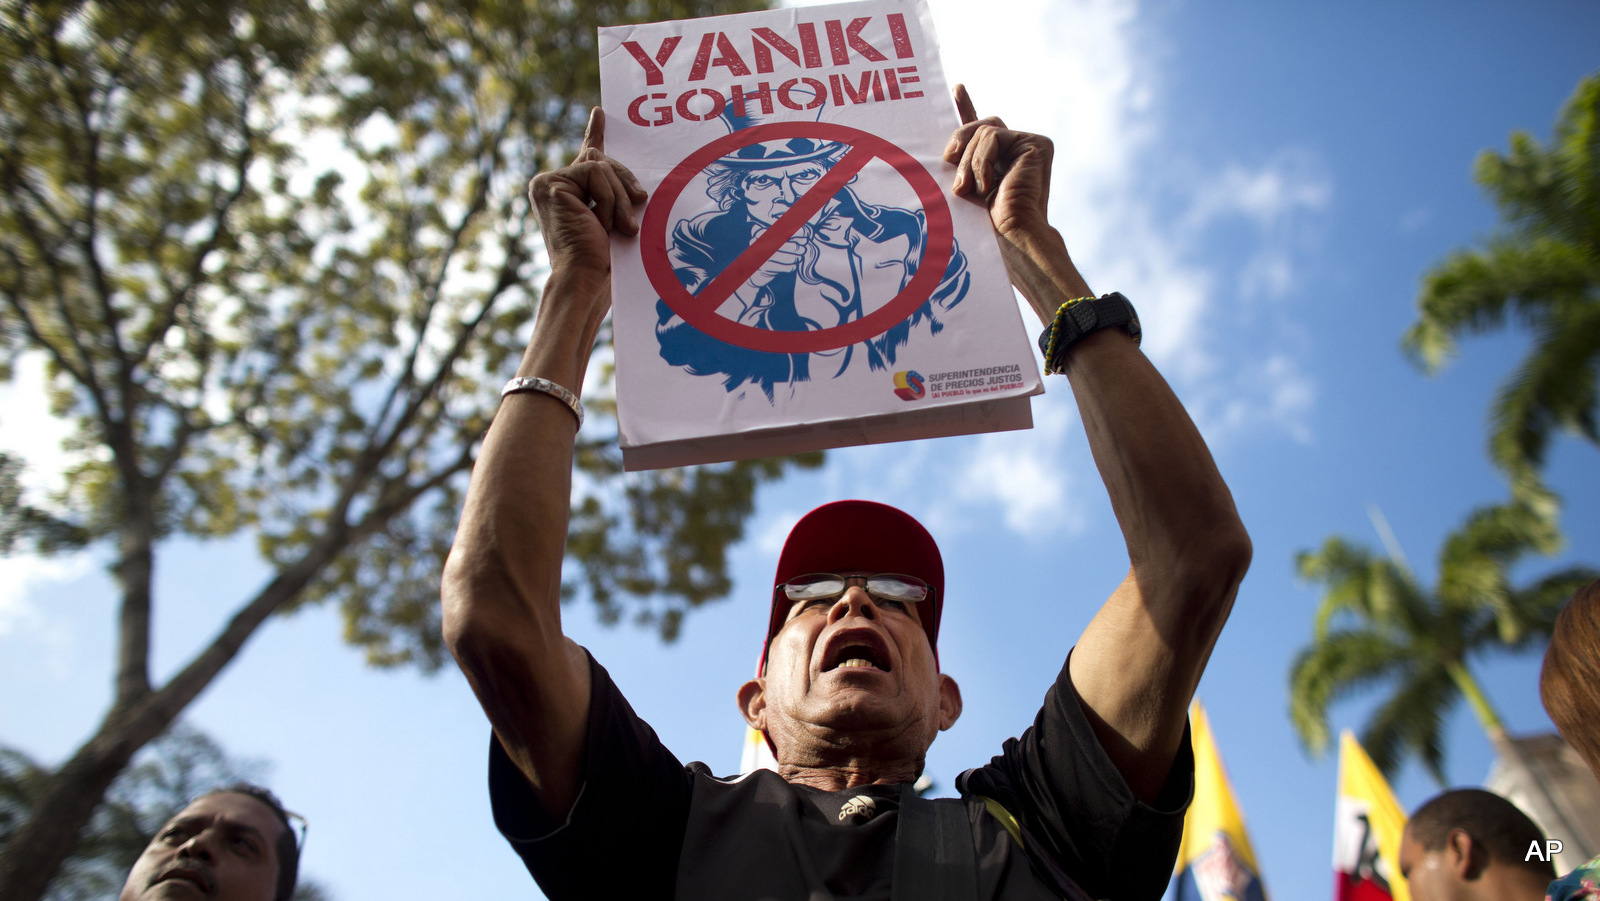 A protester holds up an poster of Uncle Sam during a rally protesting U.S. regime change efforts in Venezuela at the Miraflores presidential palace in Caracas, Venezuela. (AP/Ariana Cubillos)